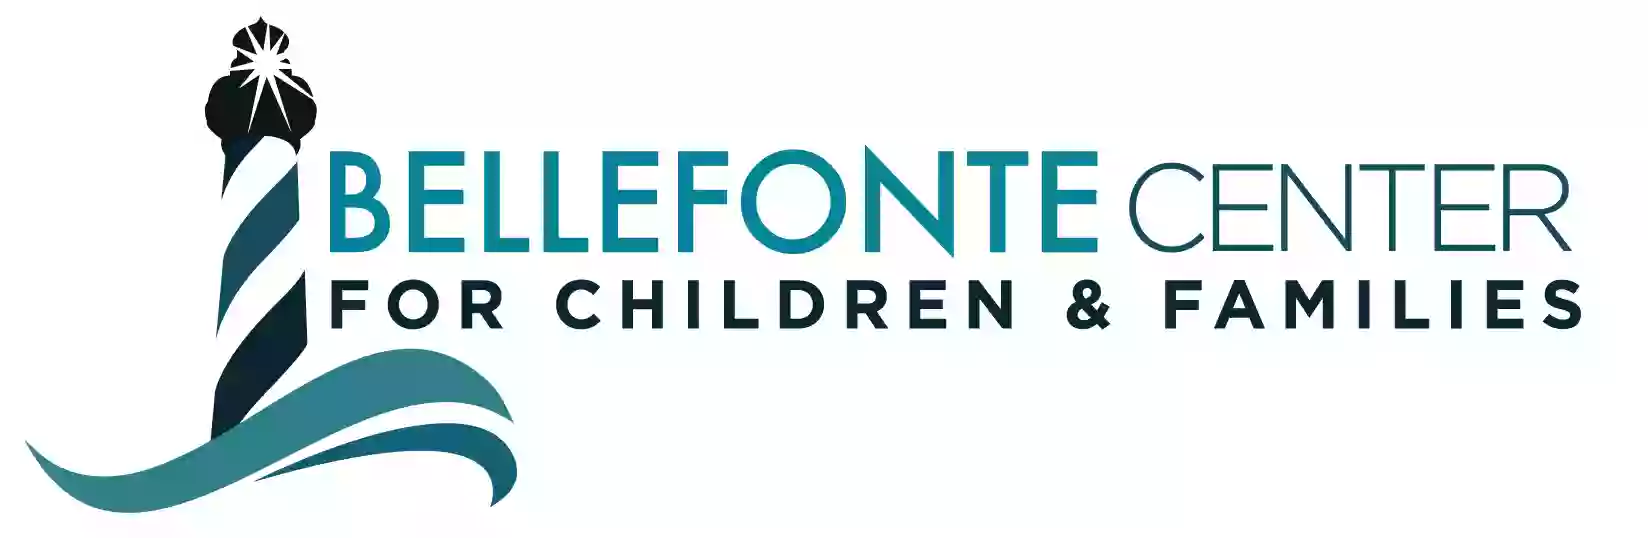 The Bellefonte Center for Children and Families